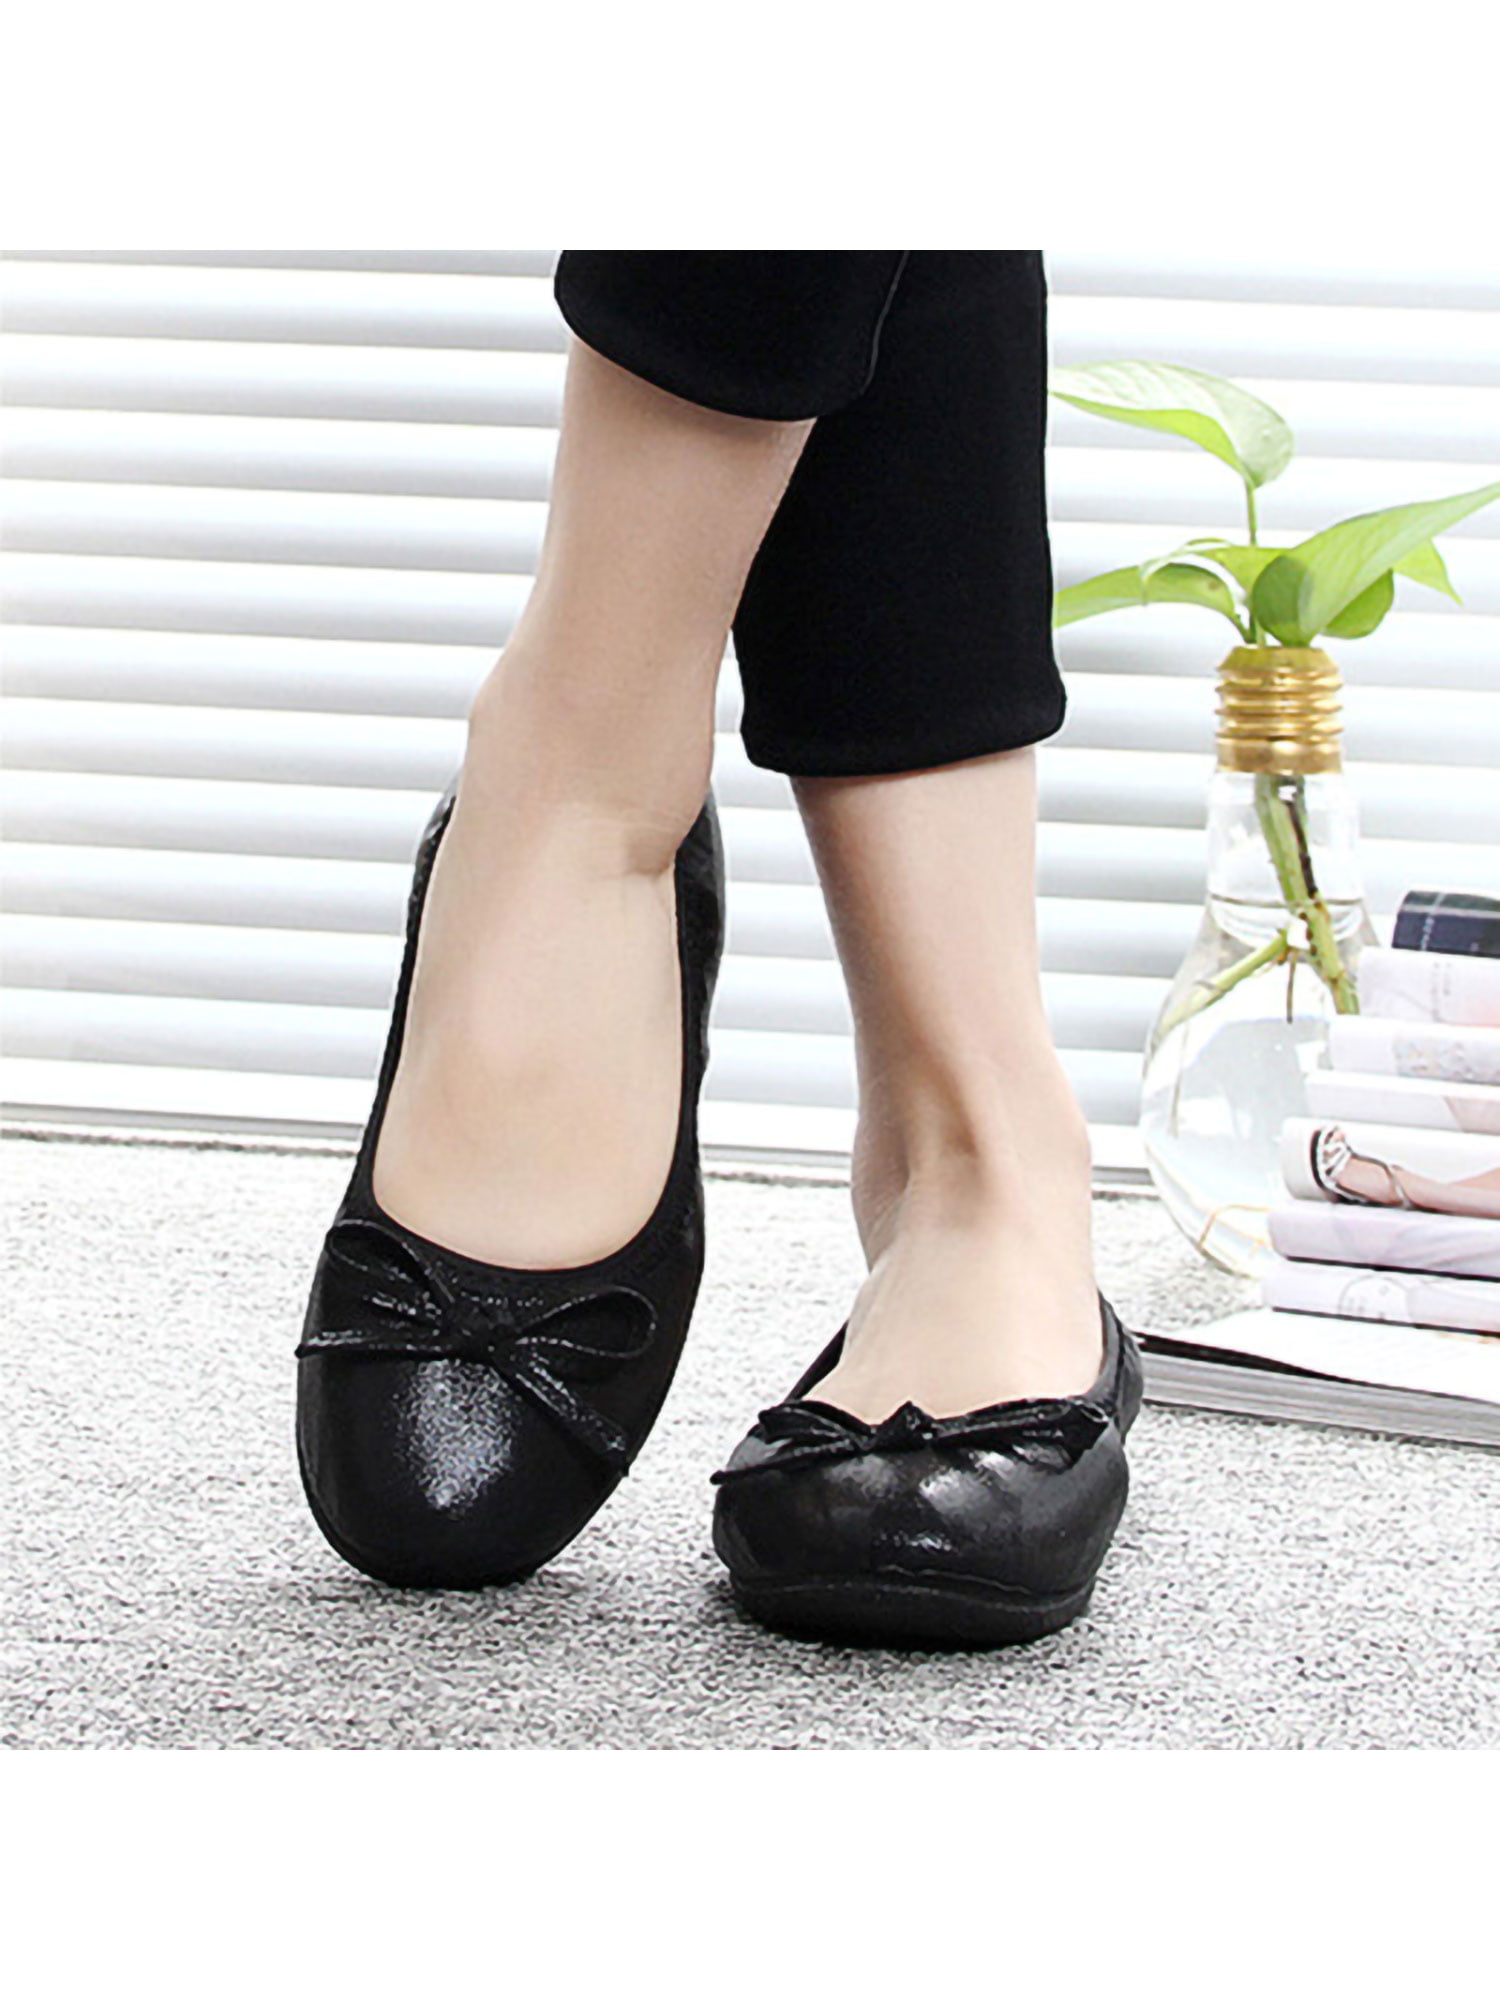 WOMENS LADIES BOW BALLERINA CLEAR BALLET DOLLY PUMPS SUMMER SHOES 